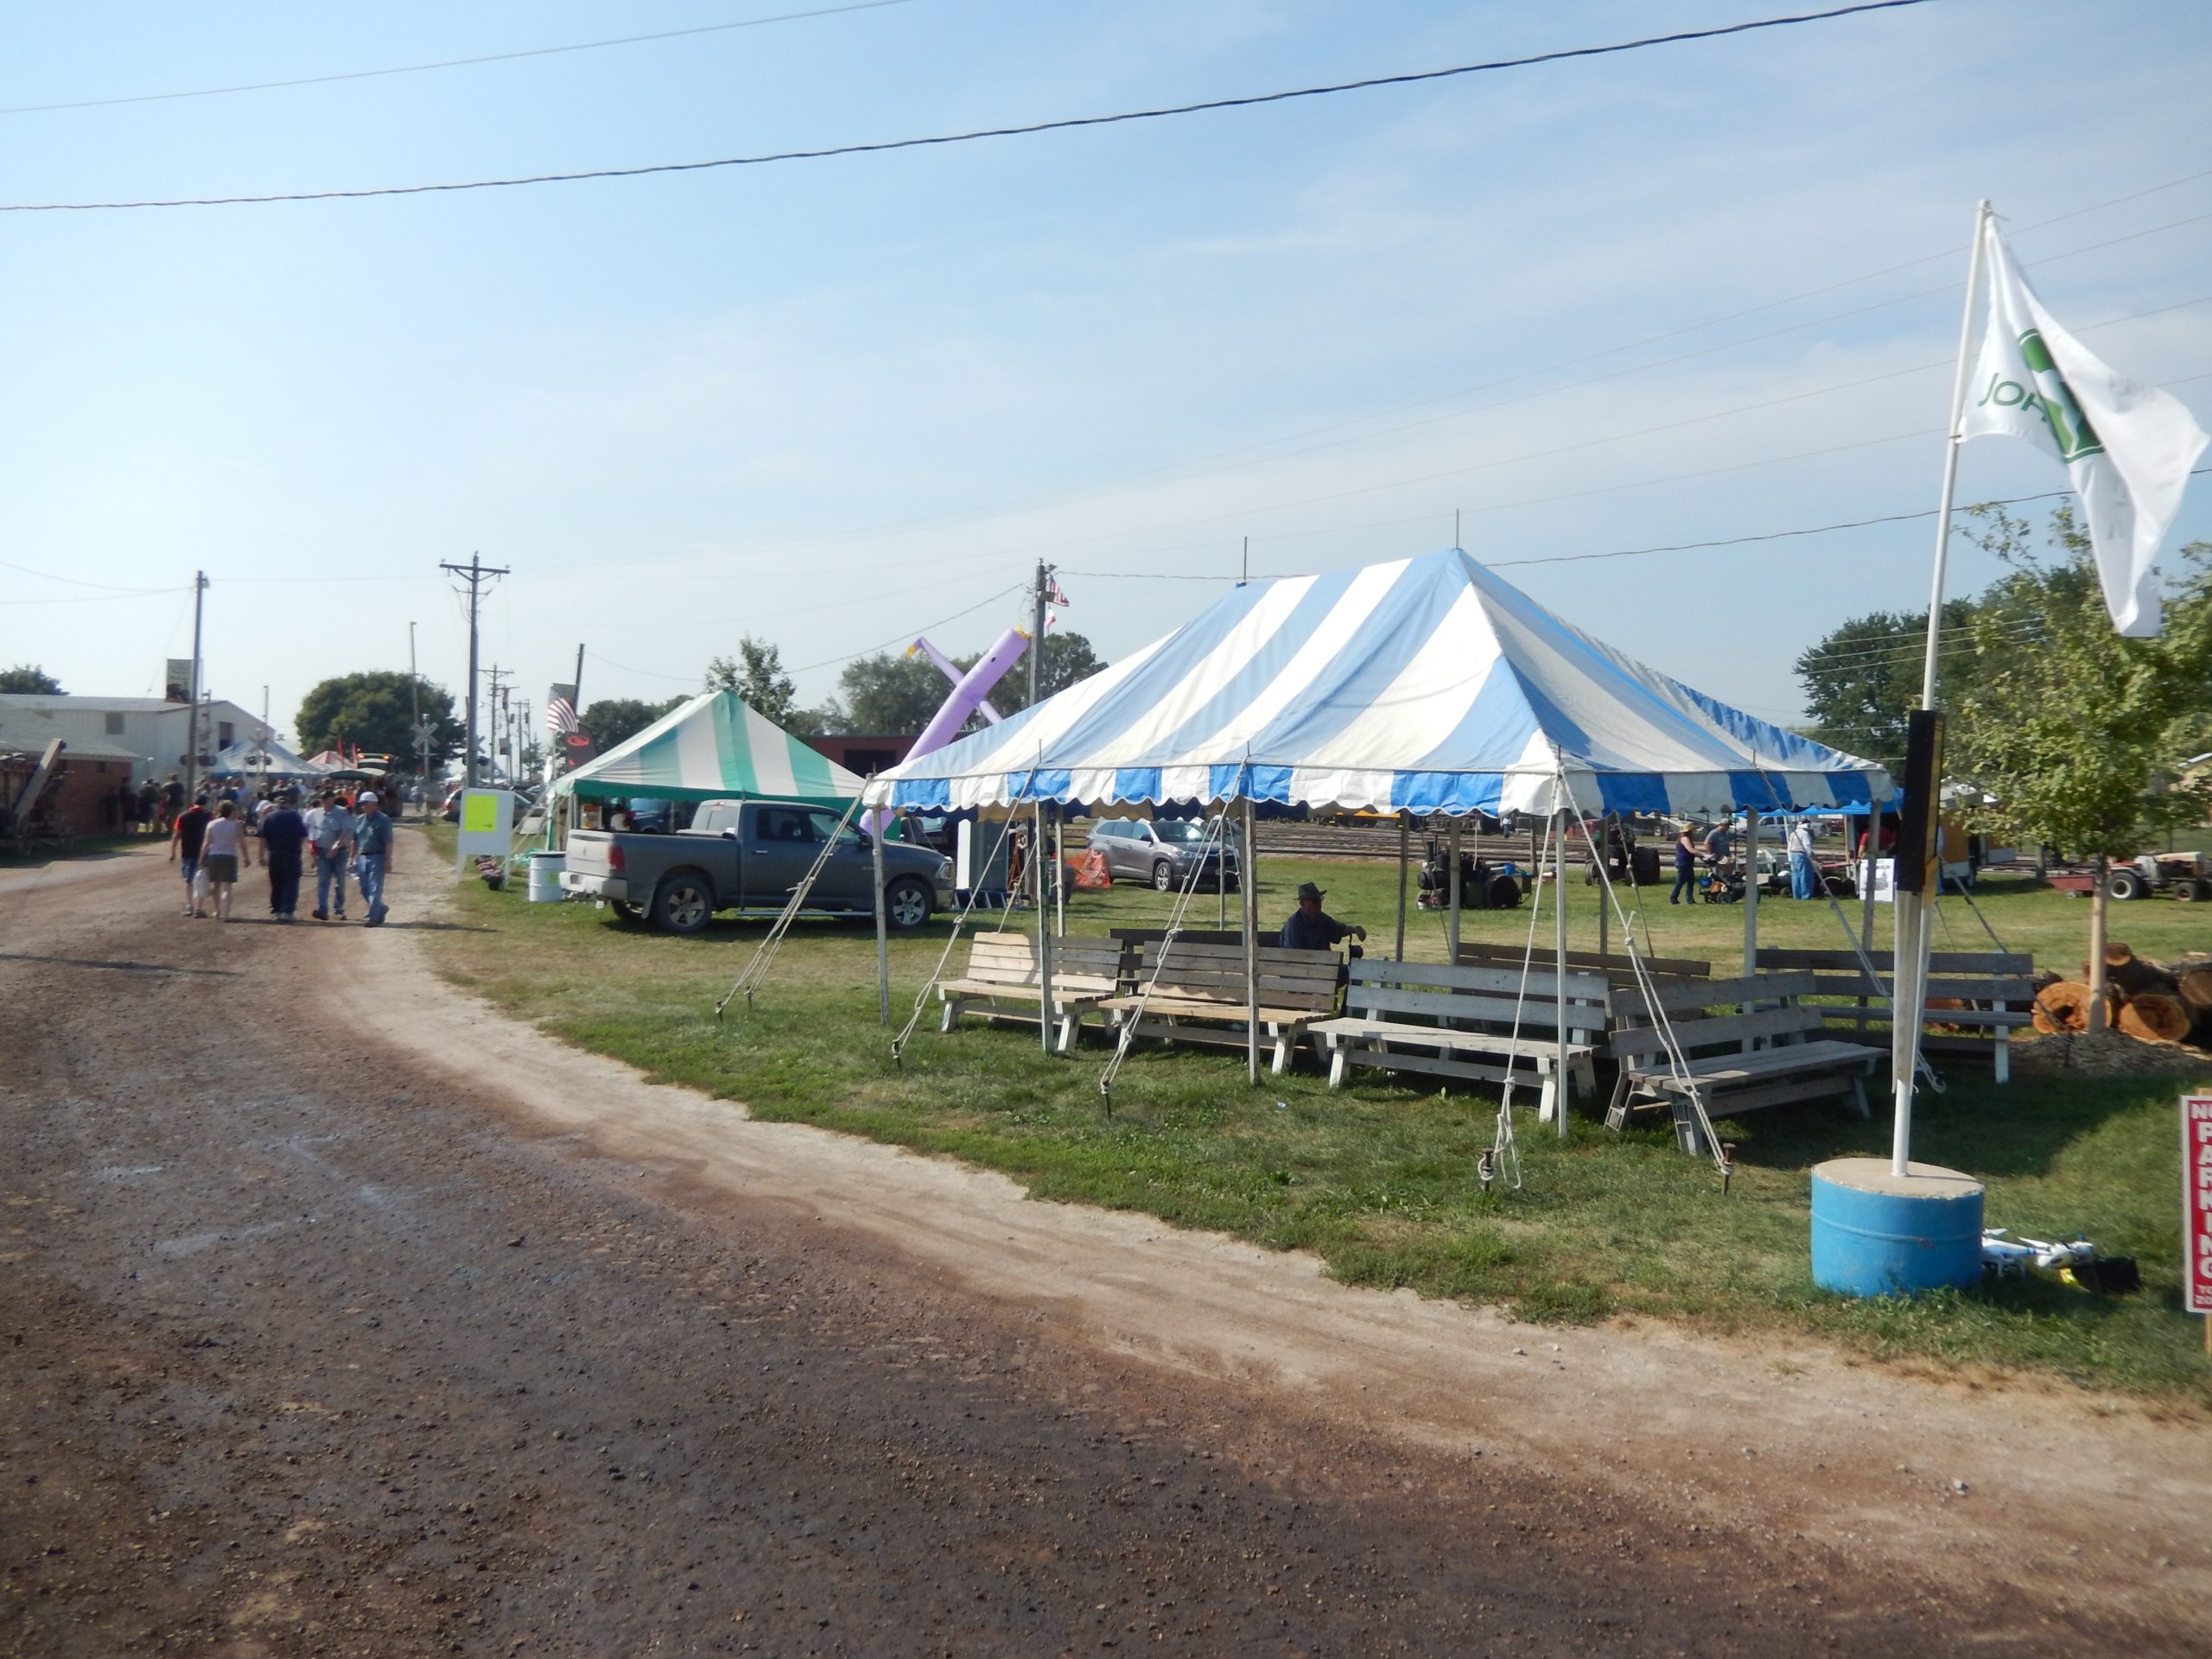 Multiple rope and pole tents used for shade and events